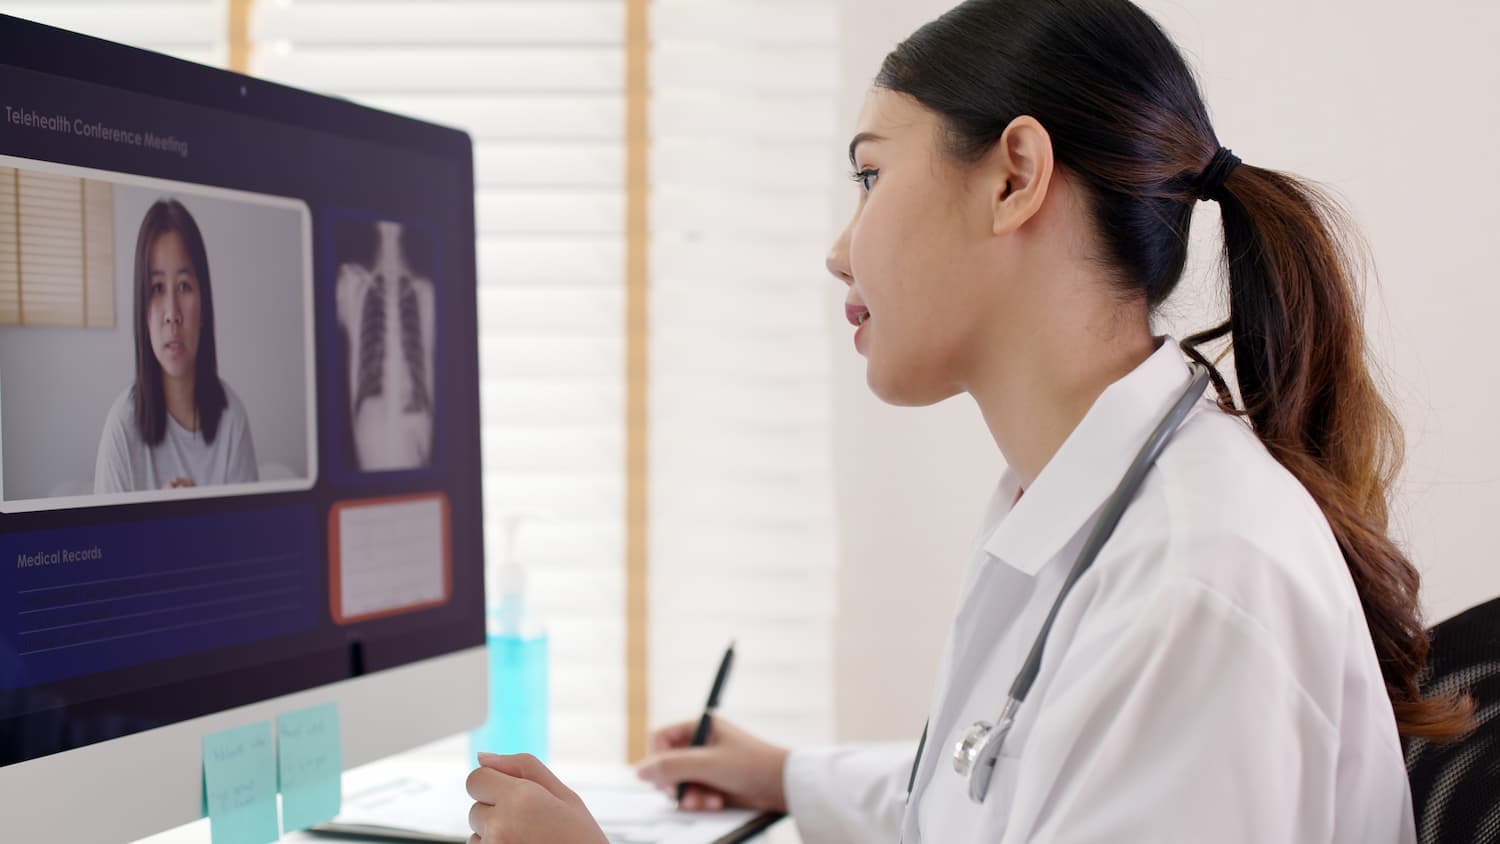 The Rapid Growth of Telemedicine Startups to Combat COVID-19